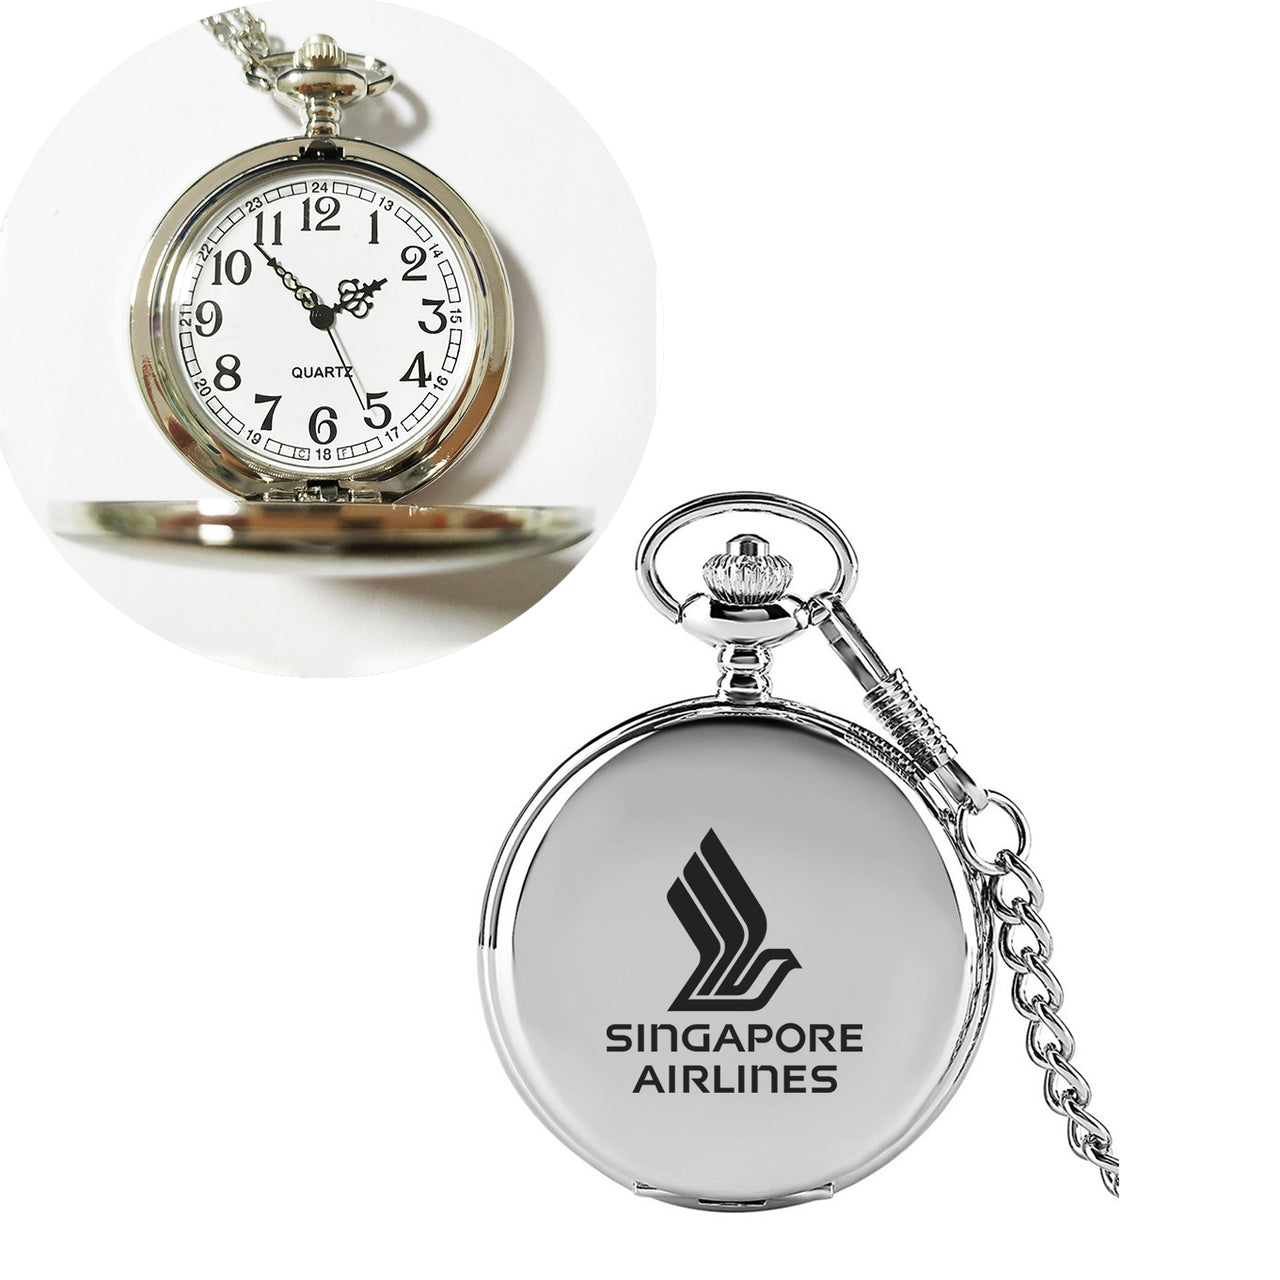 Singapore Airlines Designed Pocket Watches